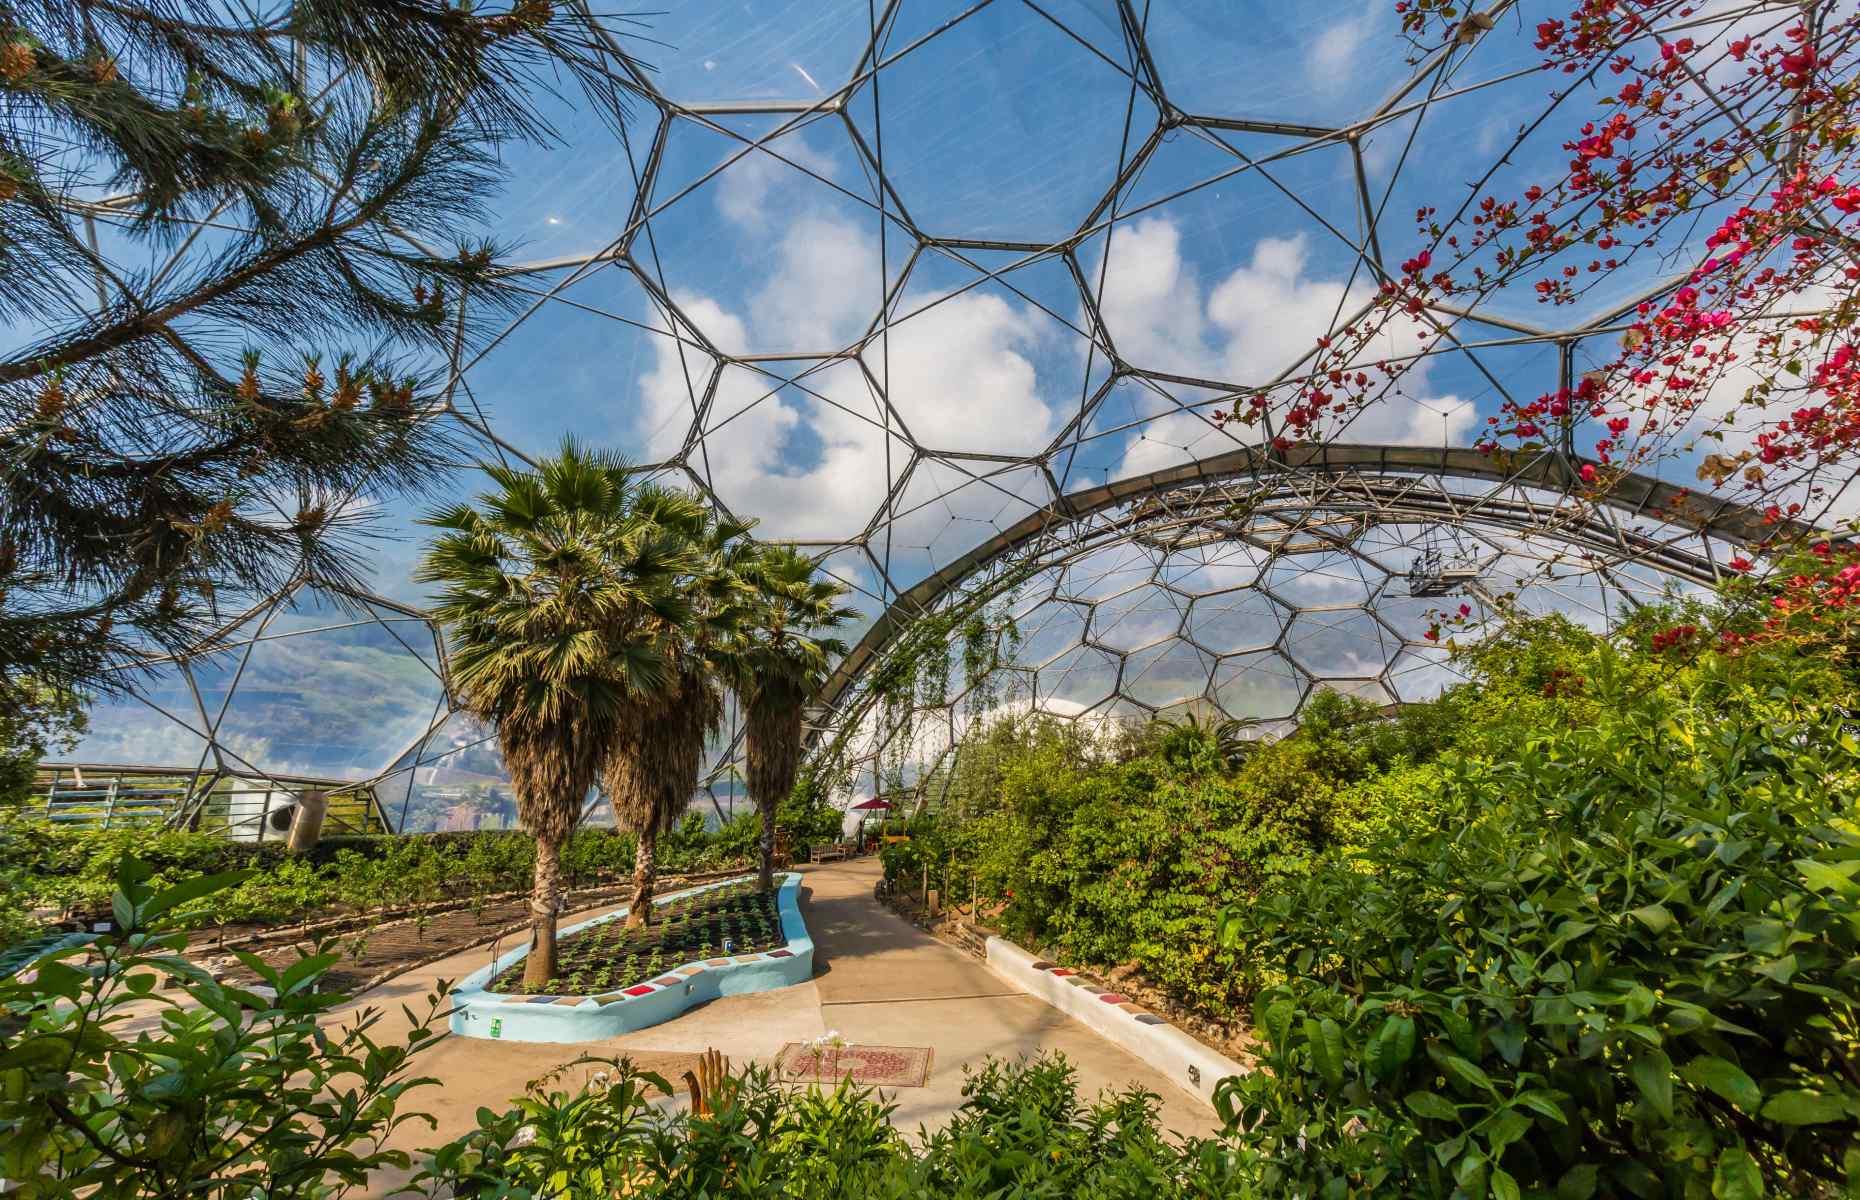 <p>Built in an old clay pit, the Eden Project’s distinct geodesic domes are a world-renowned visitor attraction in <a href="https://www.loveexploring.com/news/87277/the-best-places-to-visit-in-south-cornwall-fowey-talland-bay">south Cornwall</a>. Designed by Nicholas Grimshaw, the huge tropical garden complex first opened to the public in 2001. Today, its incredible biomes are home to thousands of different species of plants and trees from across the globe including West Africa and South America and its impressive Rainforest Biome is the largest indoor rainforest in the world. </p>